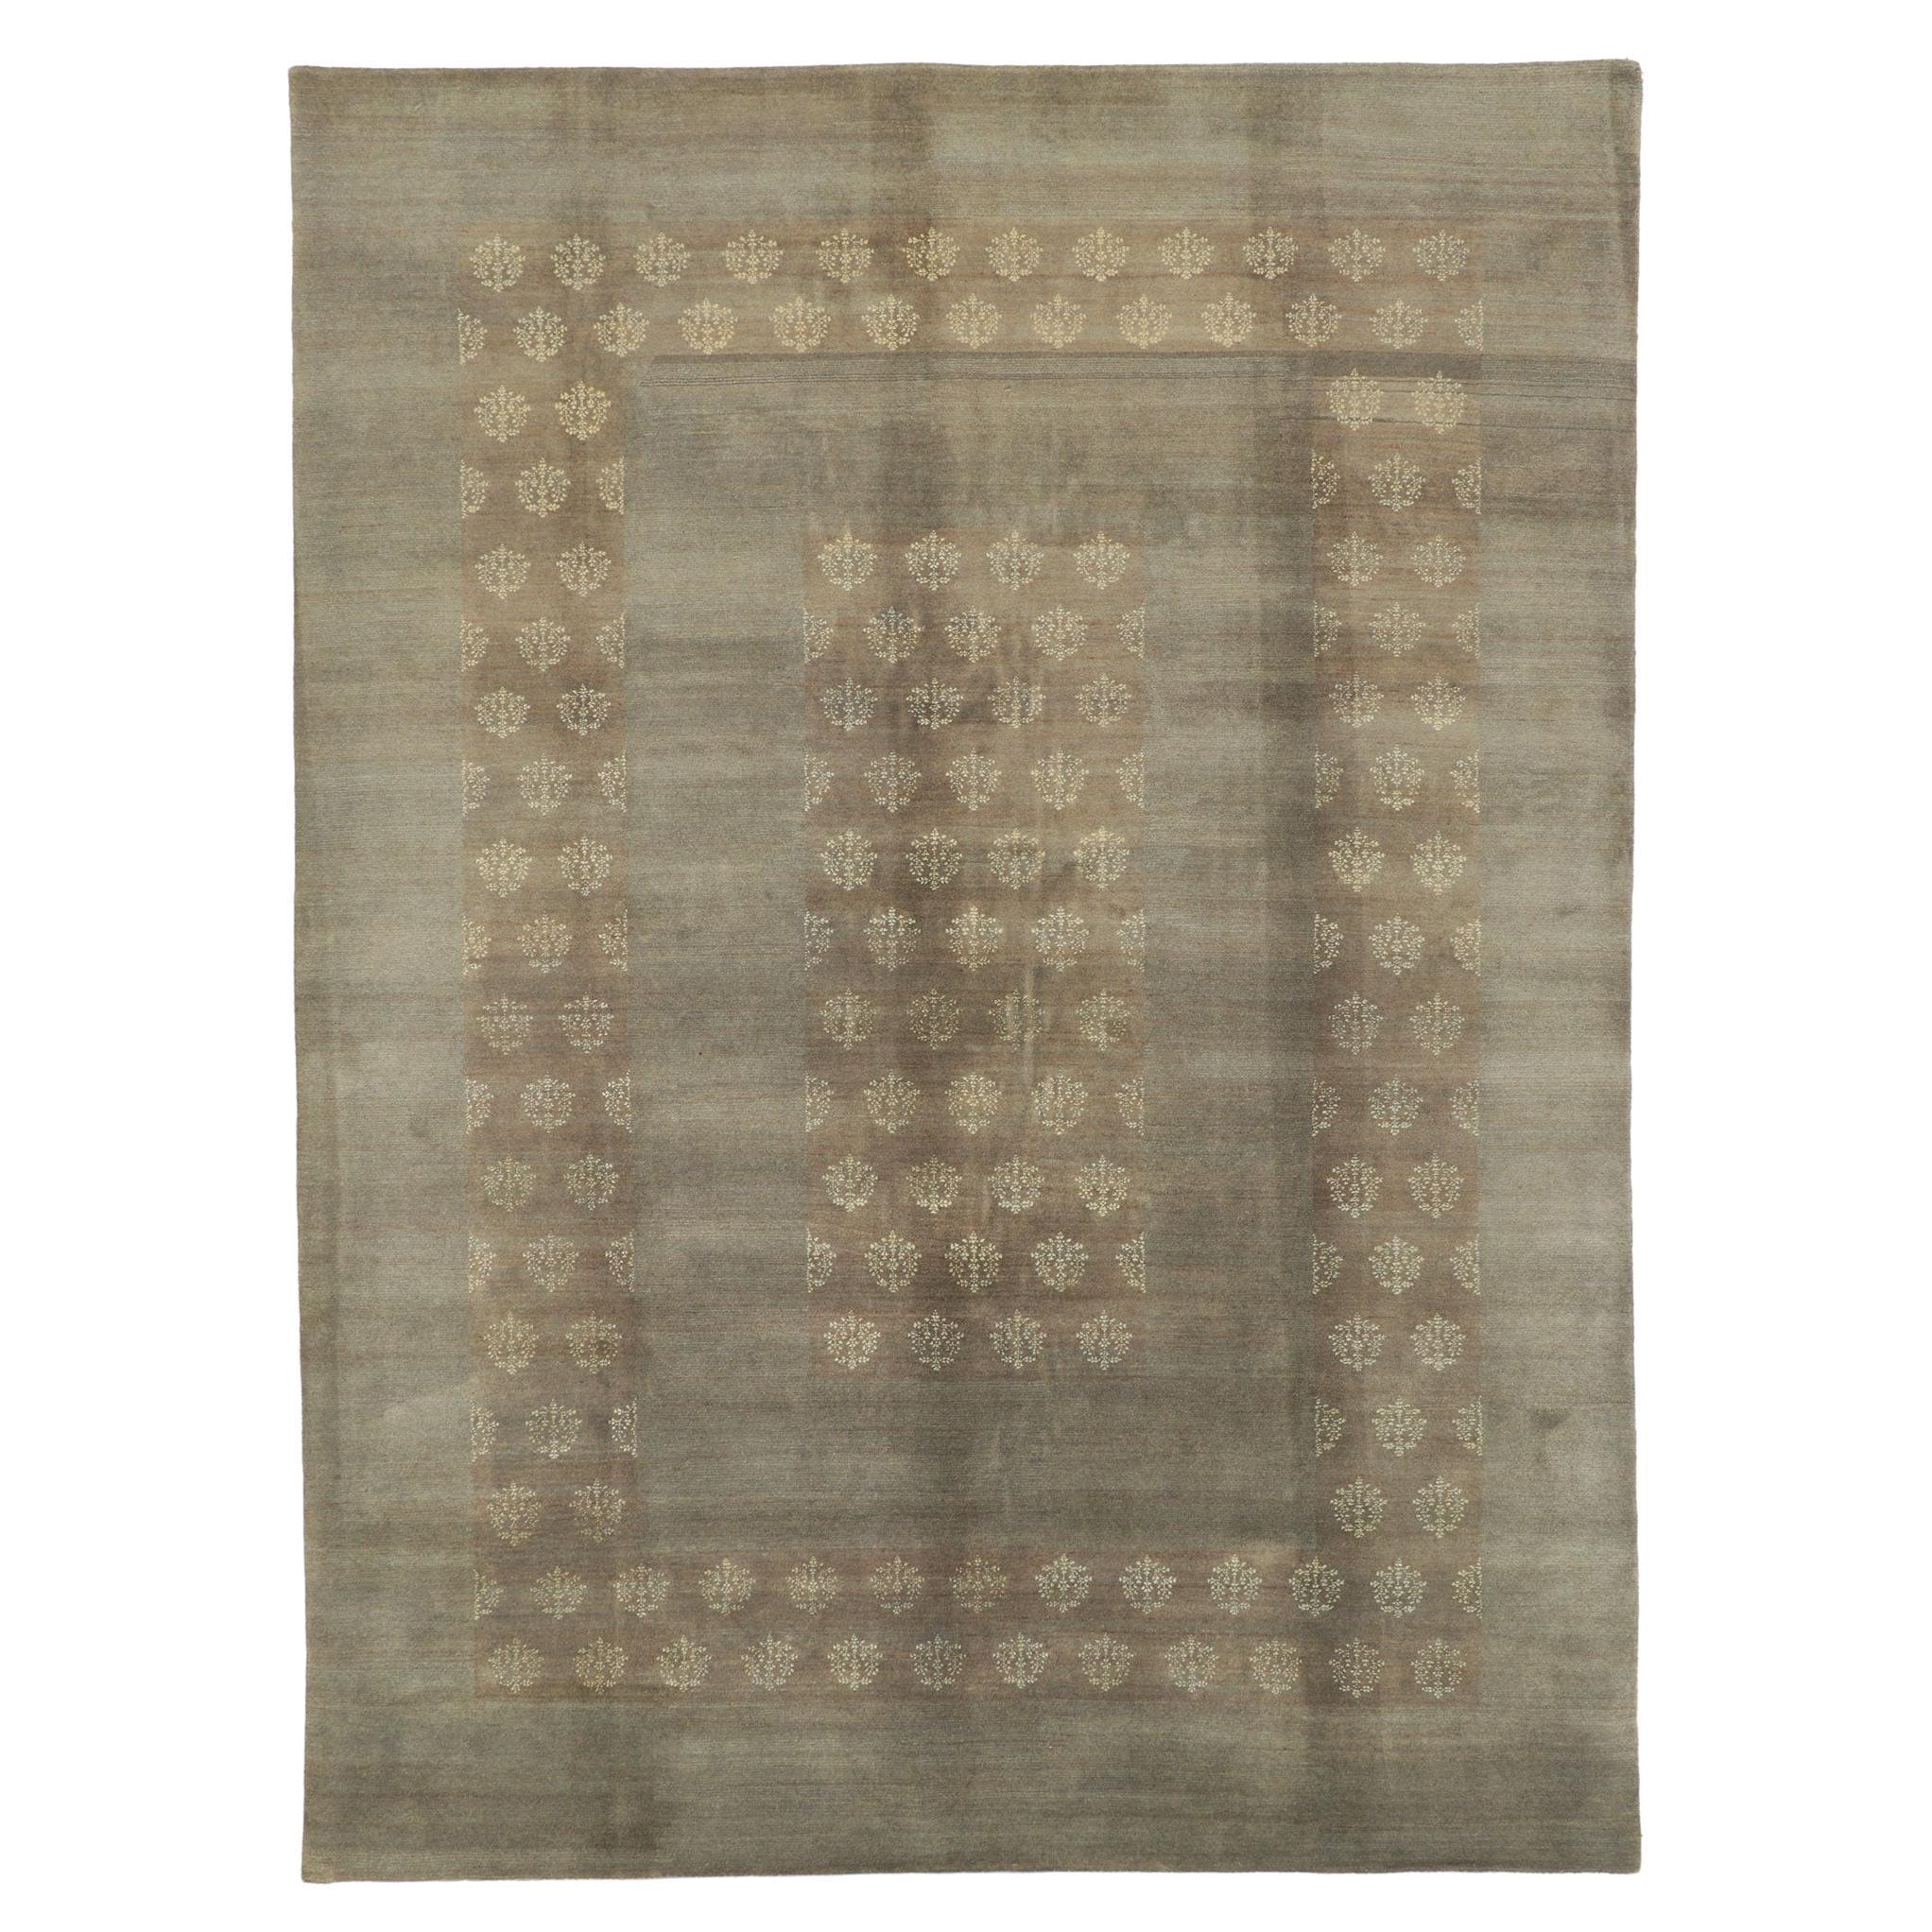 New Transitional Area Rug with Neutral Earth-Tone Colors For Sale